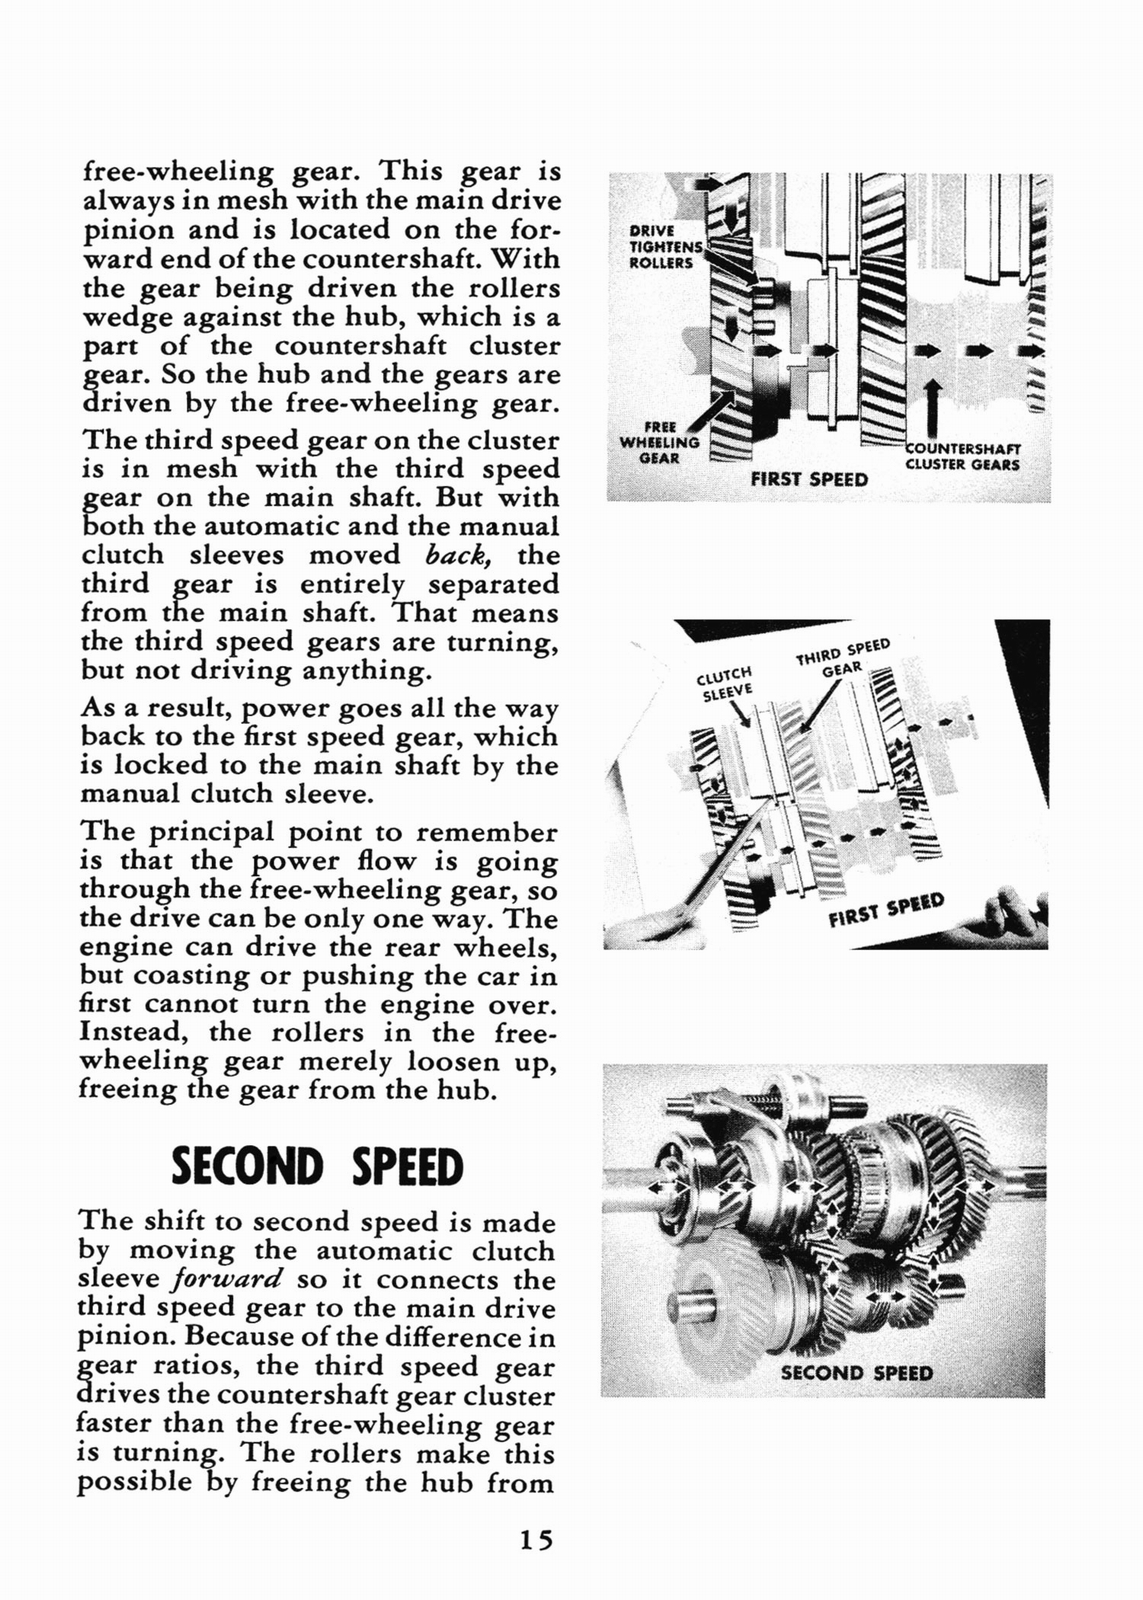 1948 Chrysler Fluid Drive Booklet Page 12